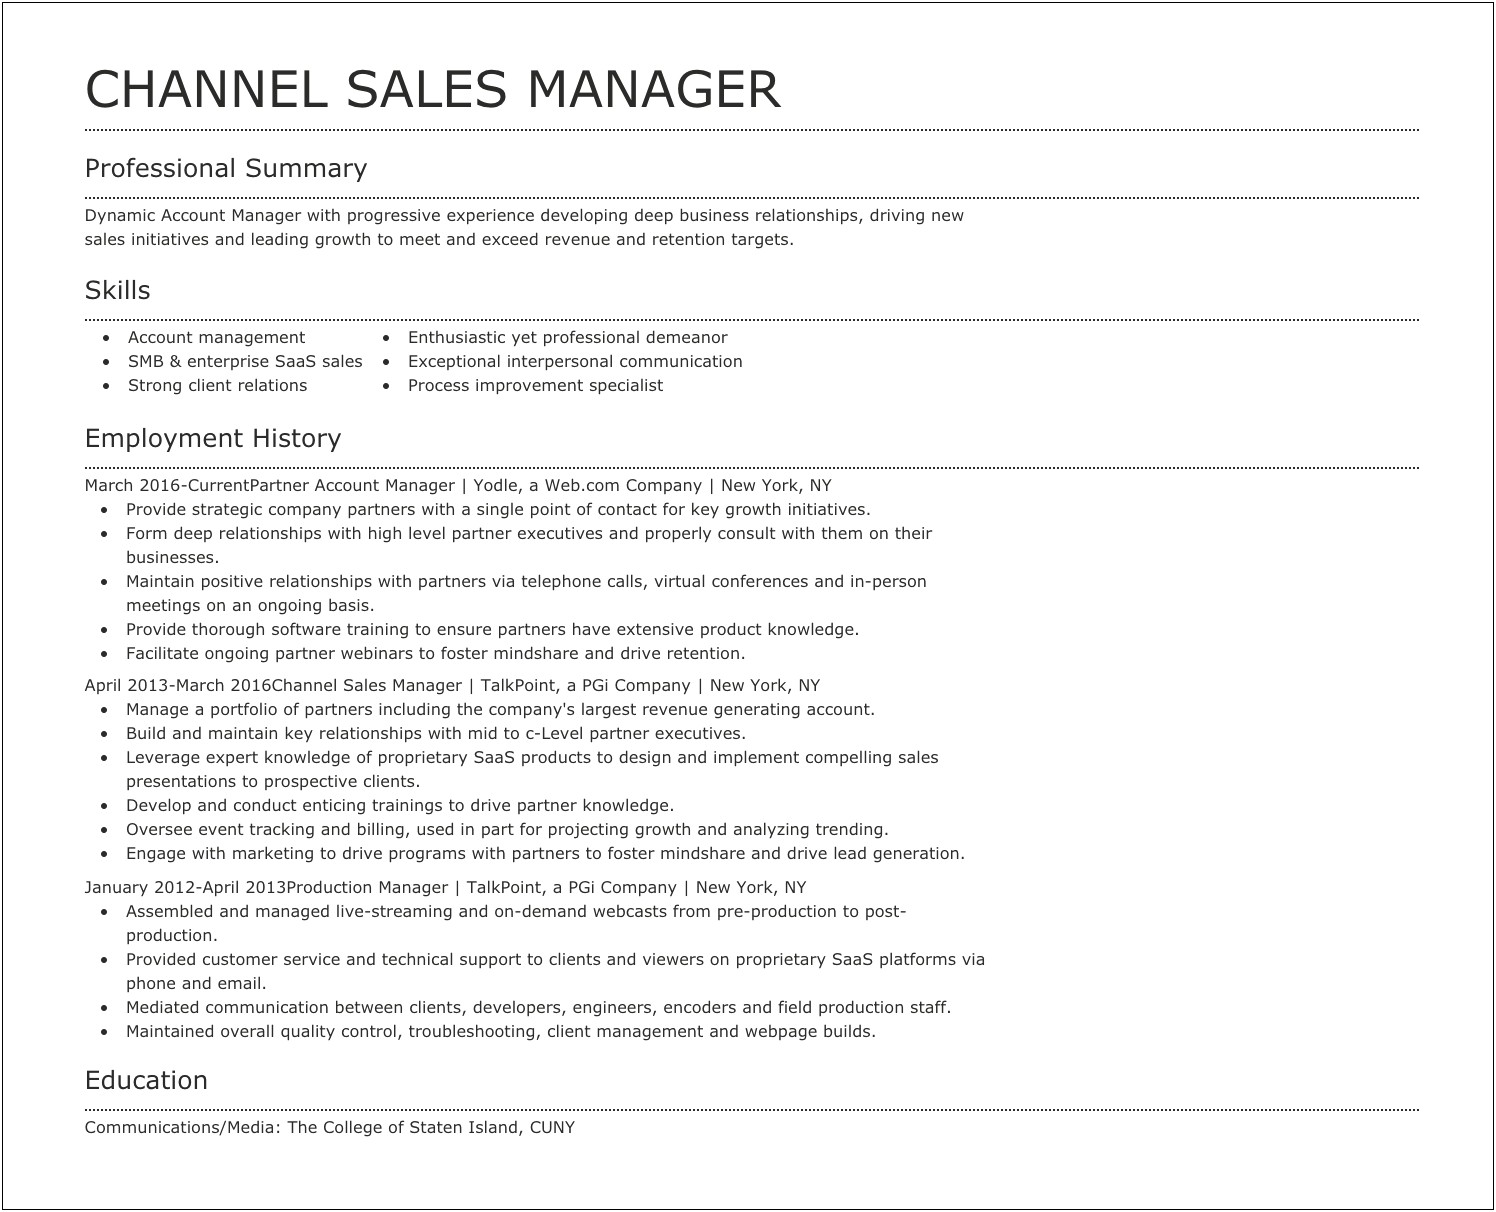 Example Resume Summaries For Management